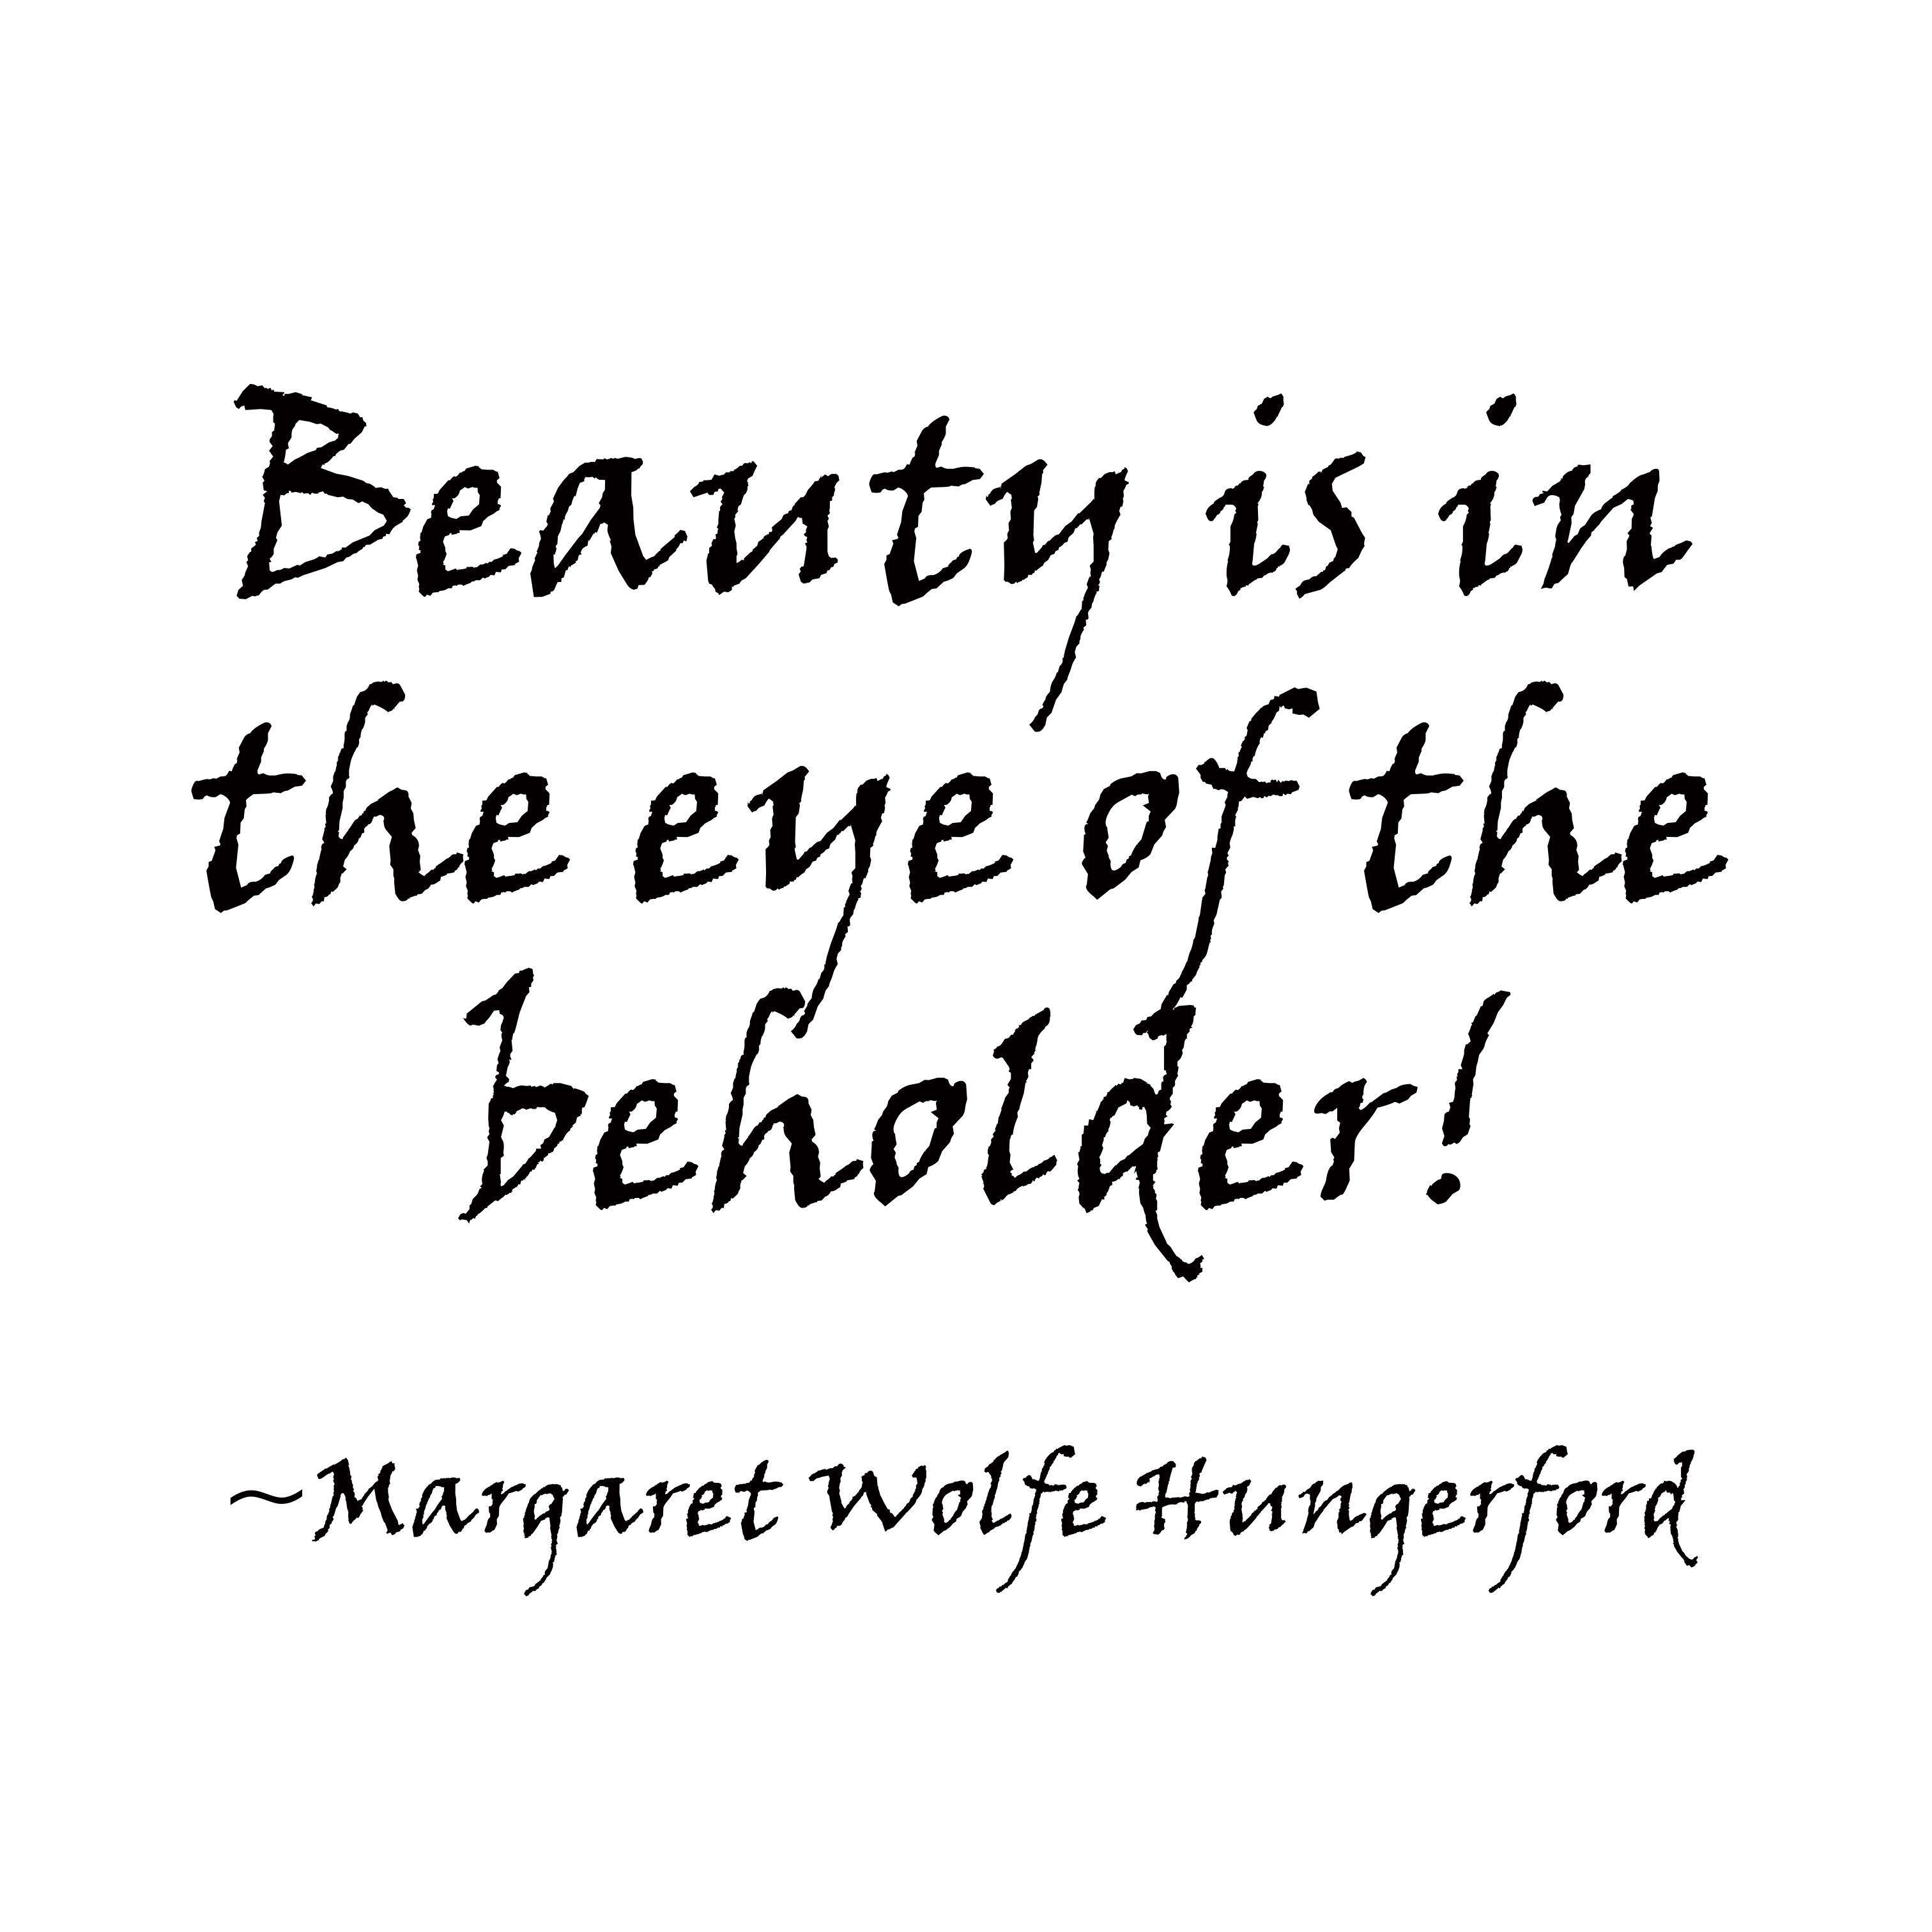 Margaret Wolfe Hungerford quote.jpg